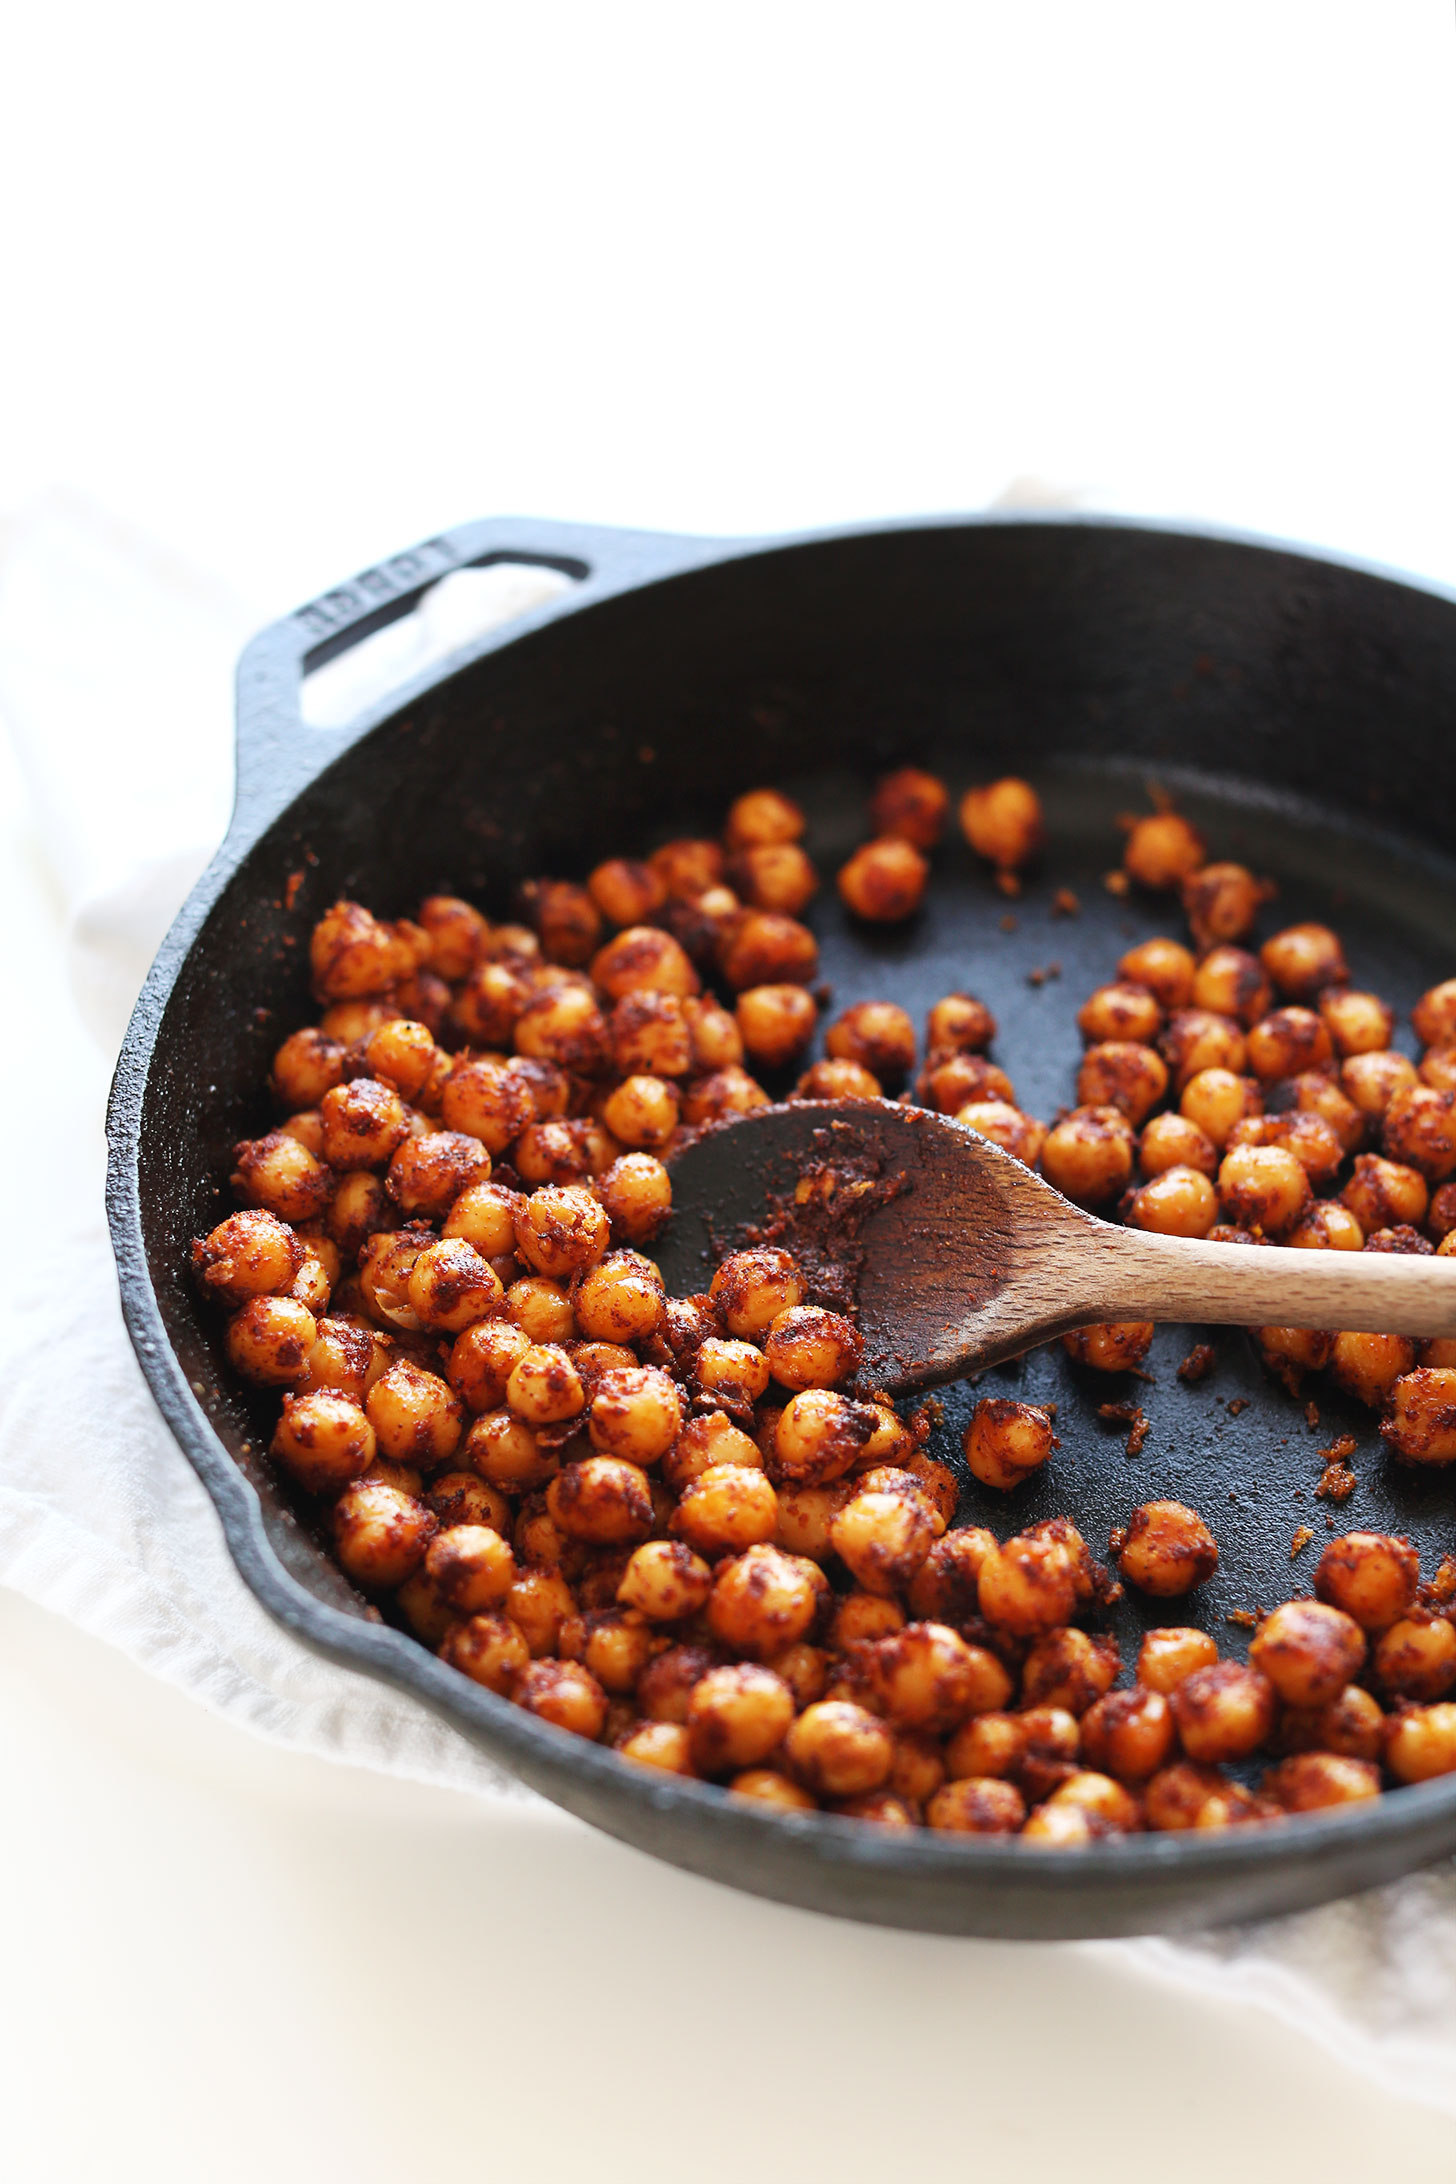 Cooking Easy Spiced Chickpeas in a cast-iron skillet for adding to avocado boats